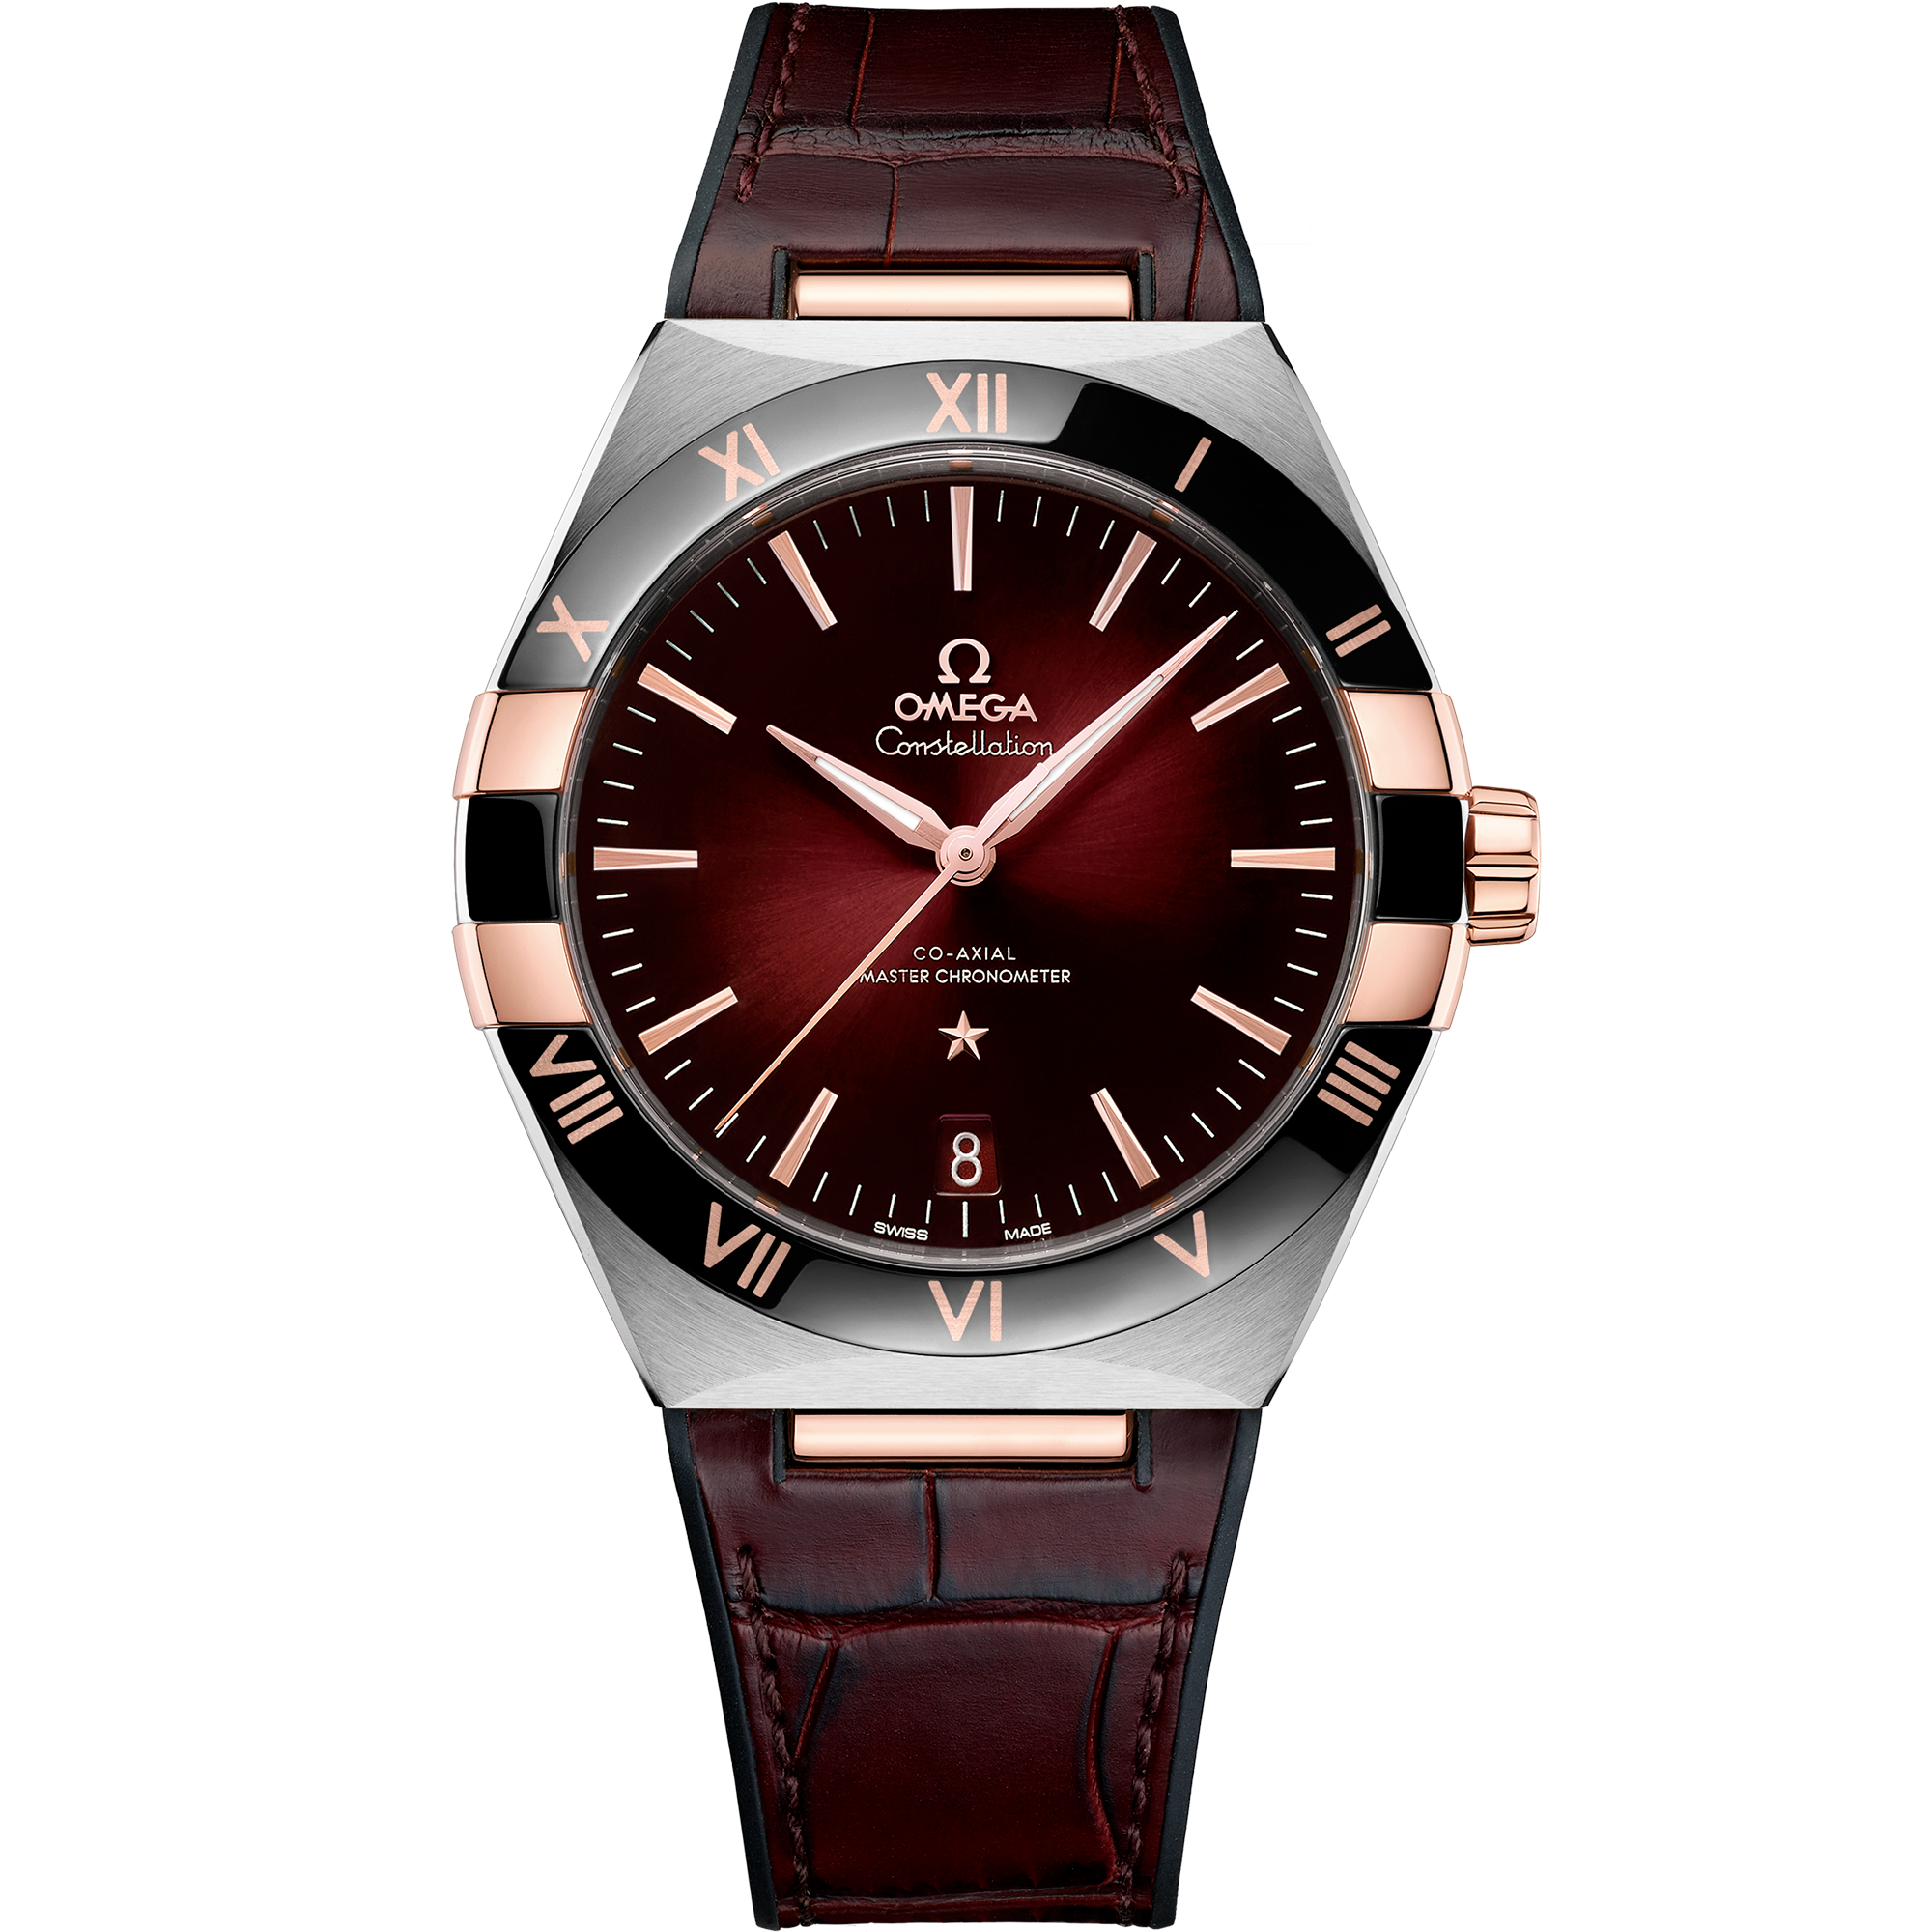 Constellation 41 mm, steel - Sedna™ gold on leather strap - 131.23.41.21.11.001